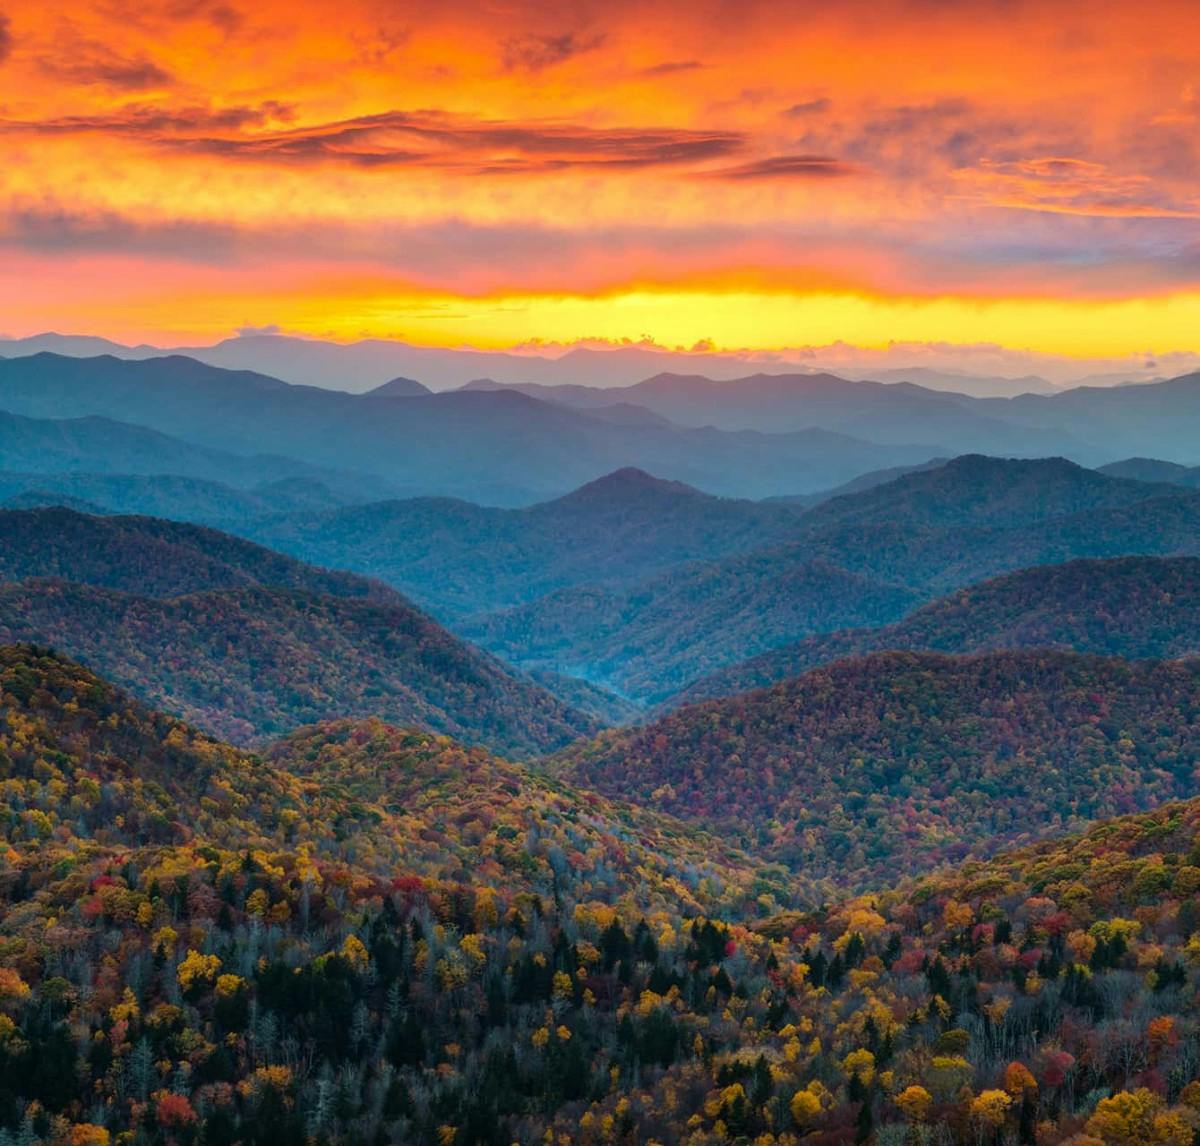 A view of the mountains during sunset with bright orange and yellow sky